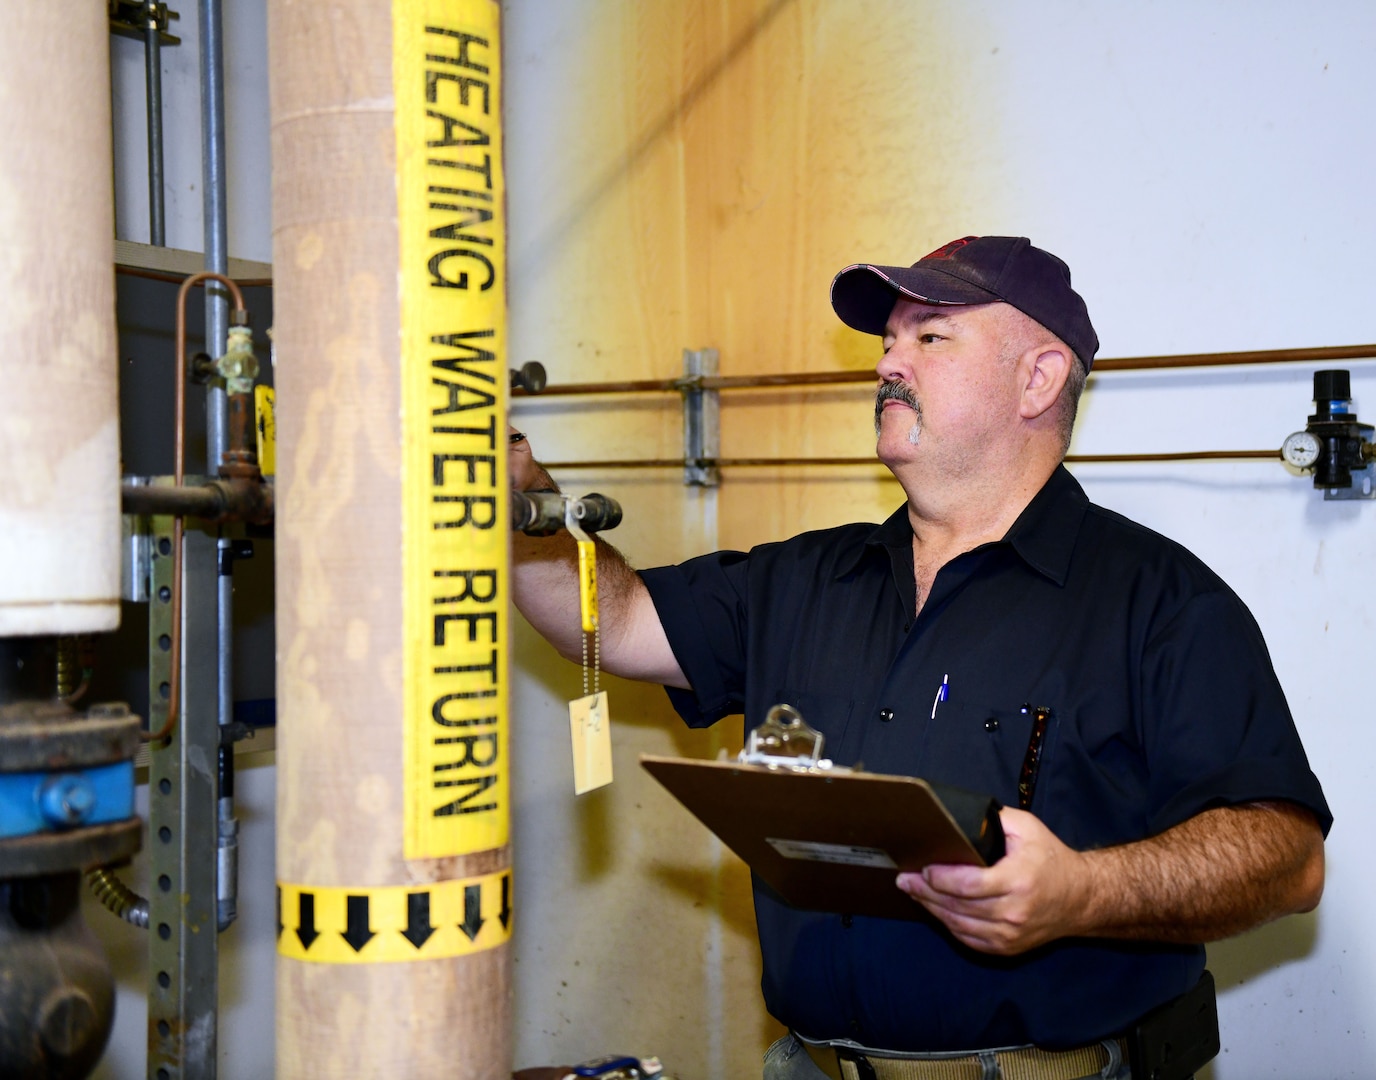 Danny Butler at Robins Air Force Base, Georgia, inventories and assesses the condition of buildings and structures on the base.